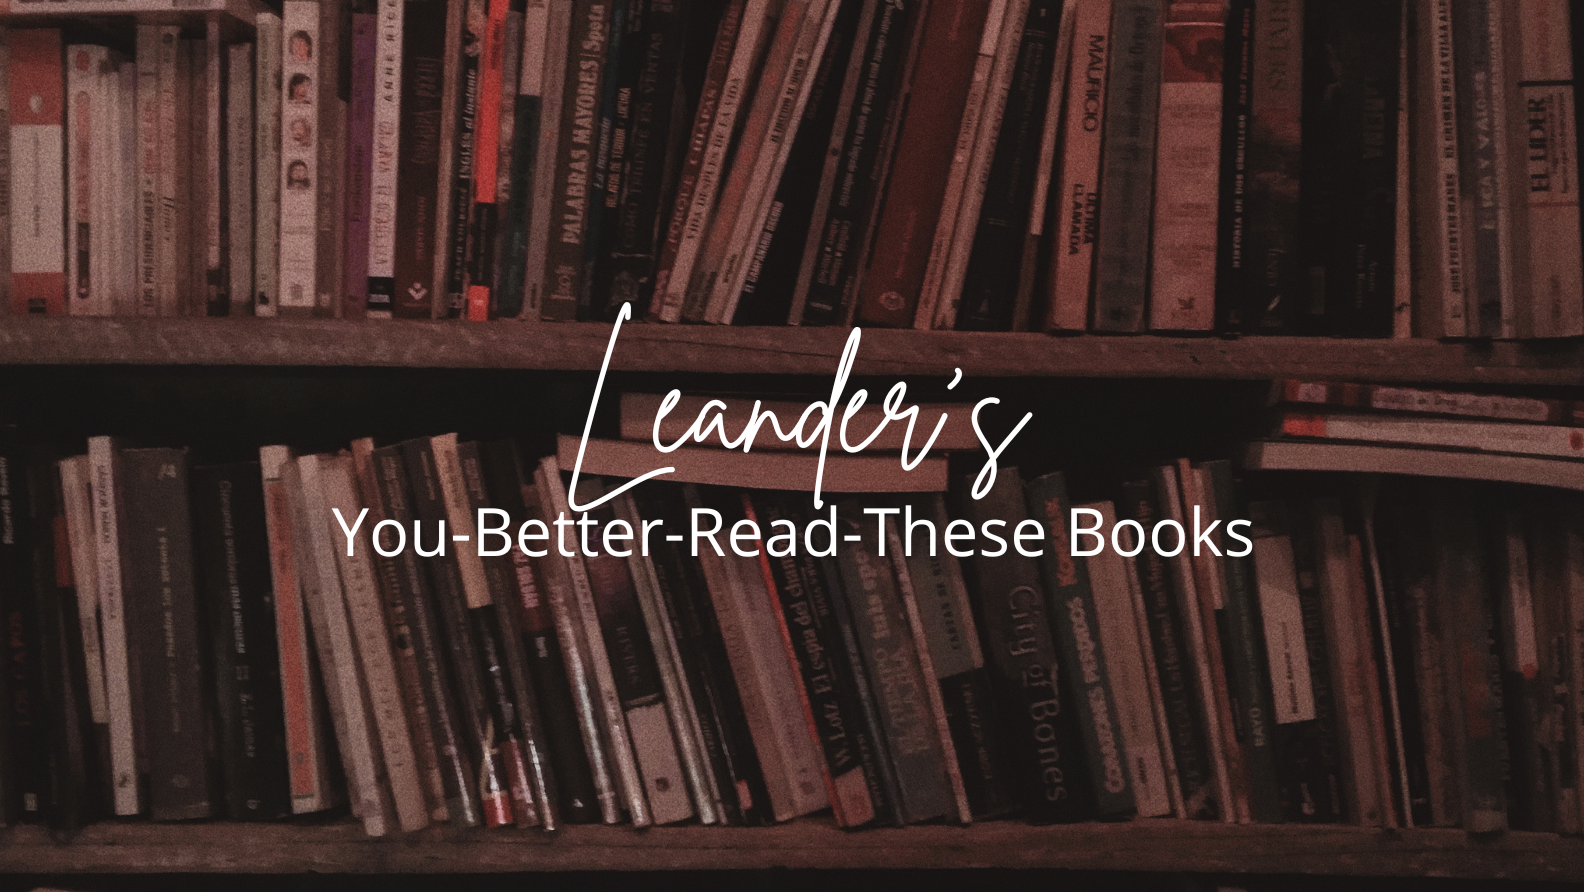 Leander's You-Better-Read-These Books | Vol. 003 [Ron Weasley]